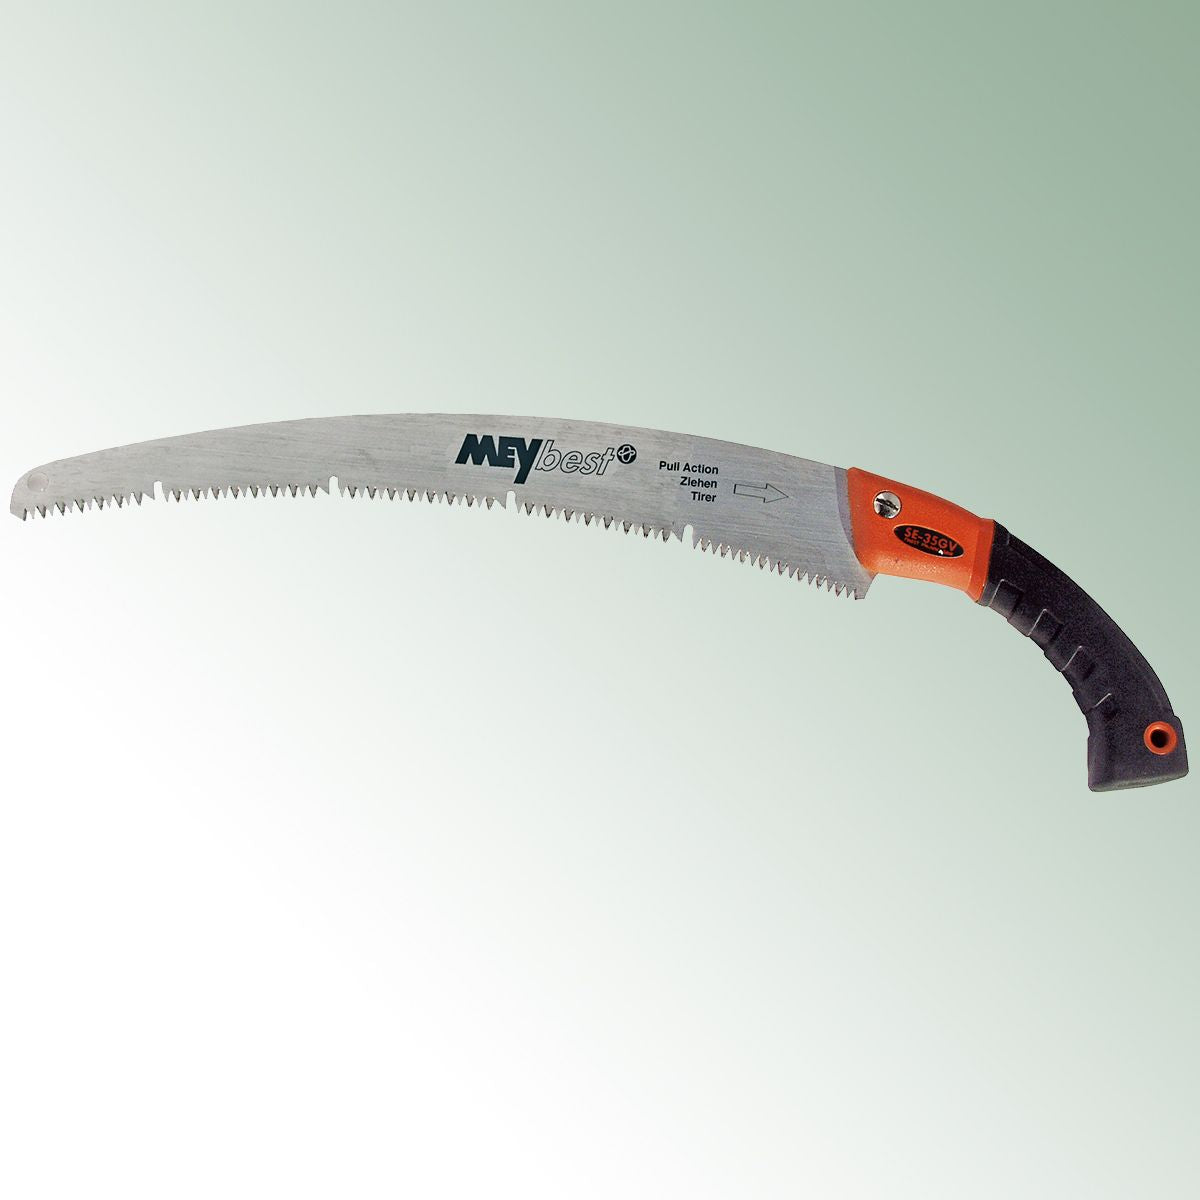 ARS Hand Pruning Saw CAM 24PRO Saw Blade Length 24 cm